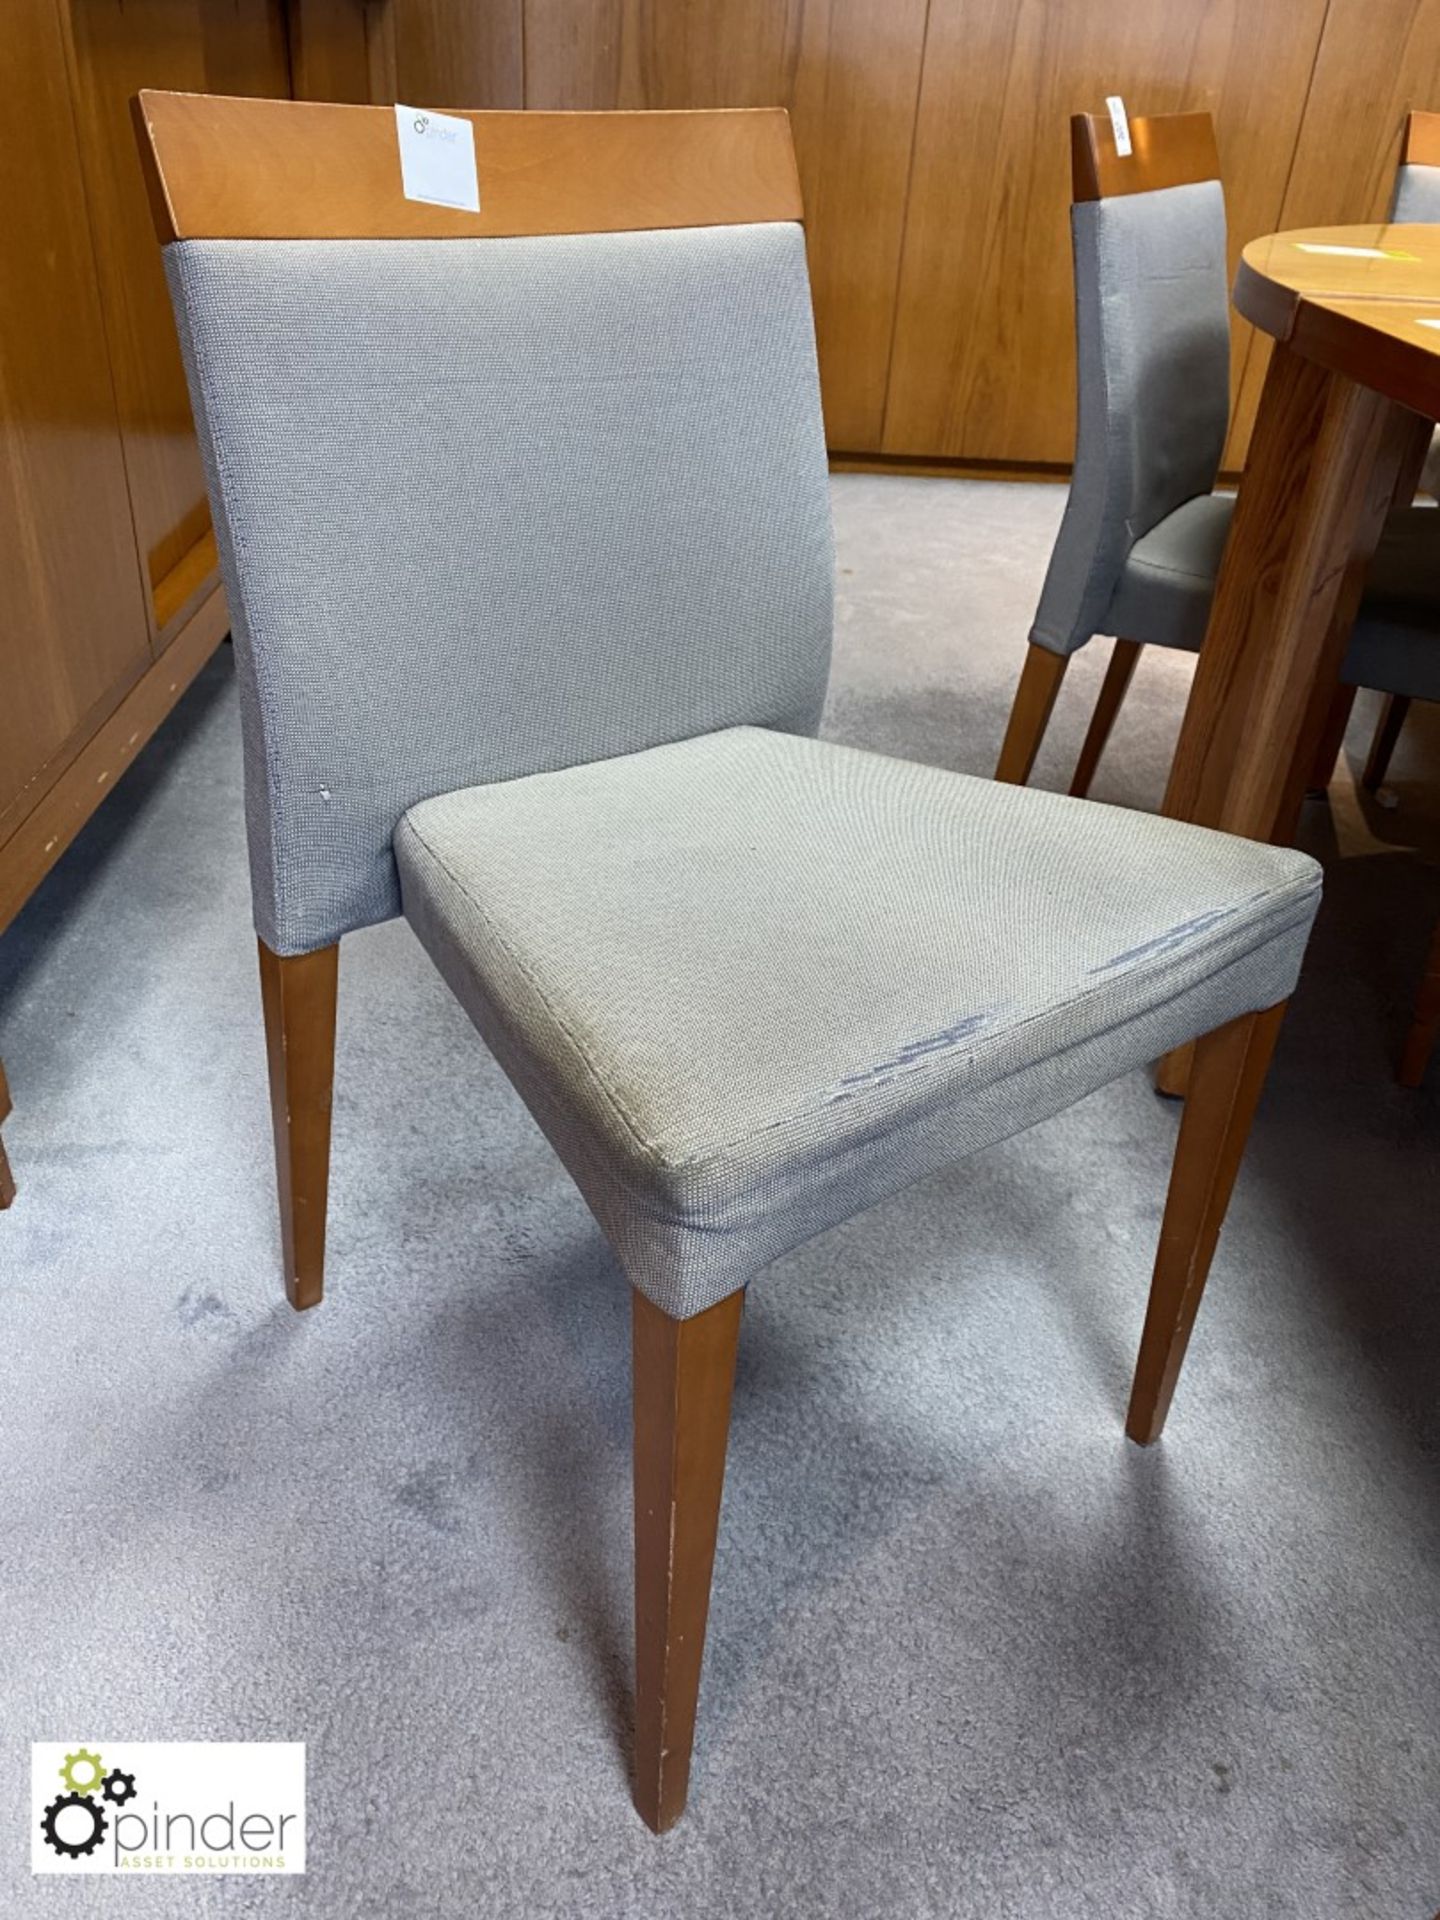 Set 11 Kesterport upholstered Meeting/Dining Chairs (located in Meeting Room 10 on 23rd Floor)